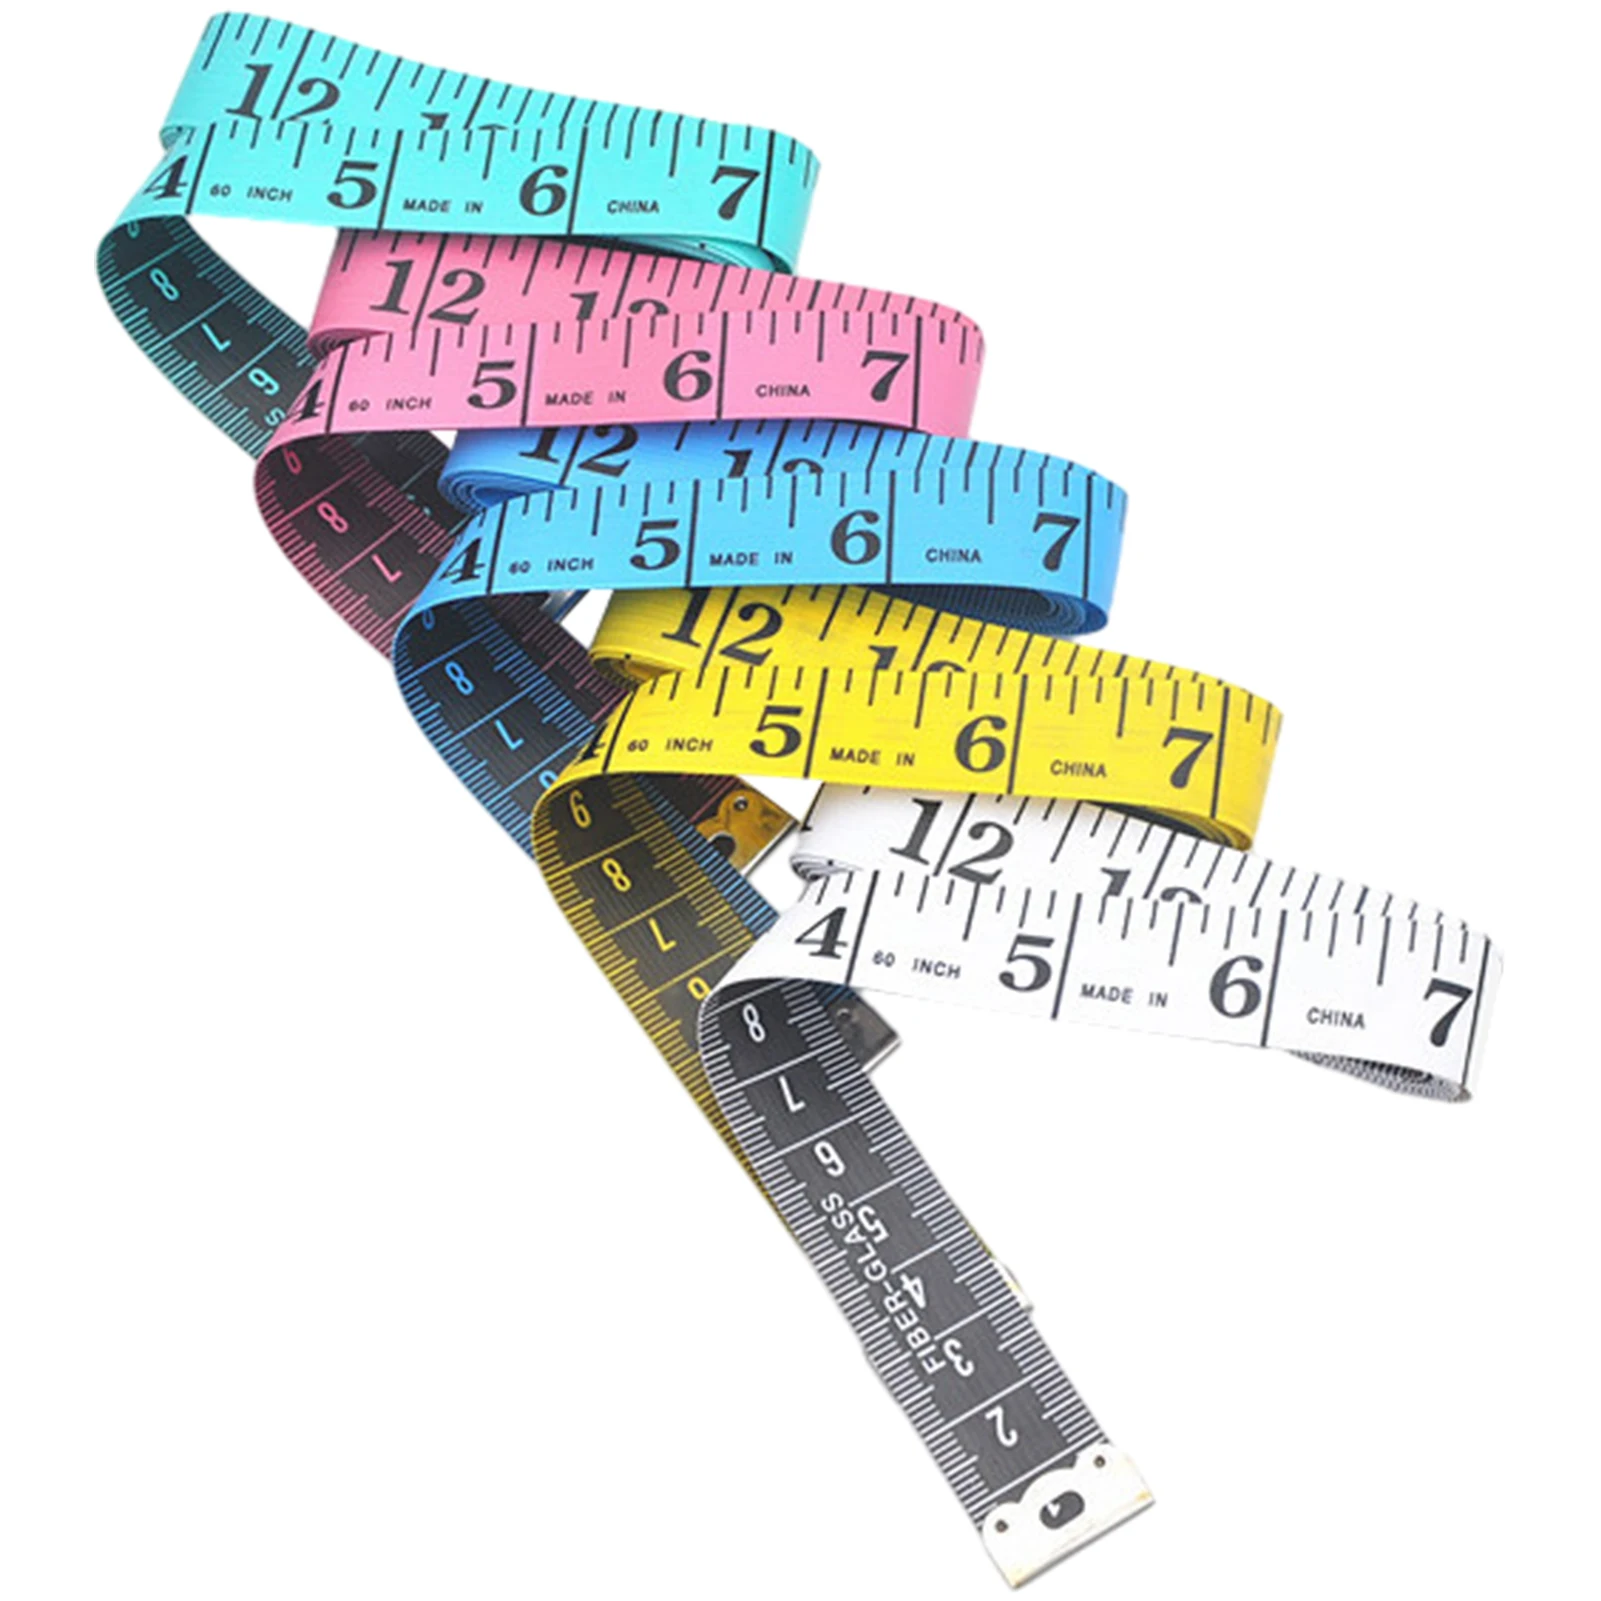 5pcs Crafts Ruler 150cm Flexible Tape Measure For Sewing Portable